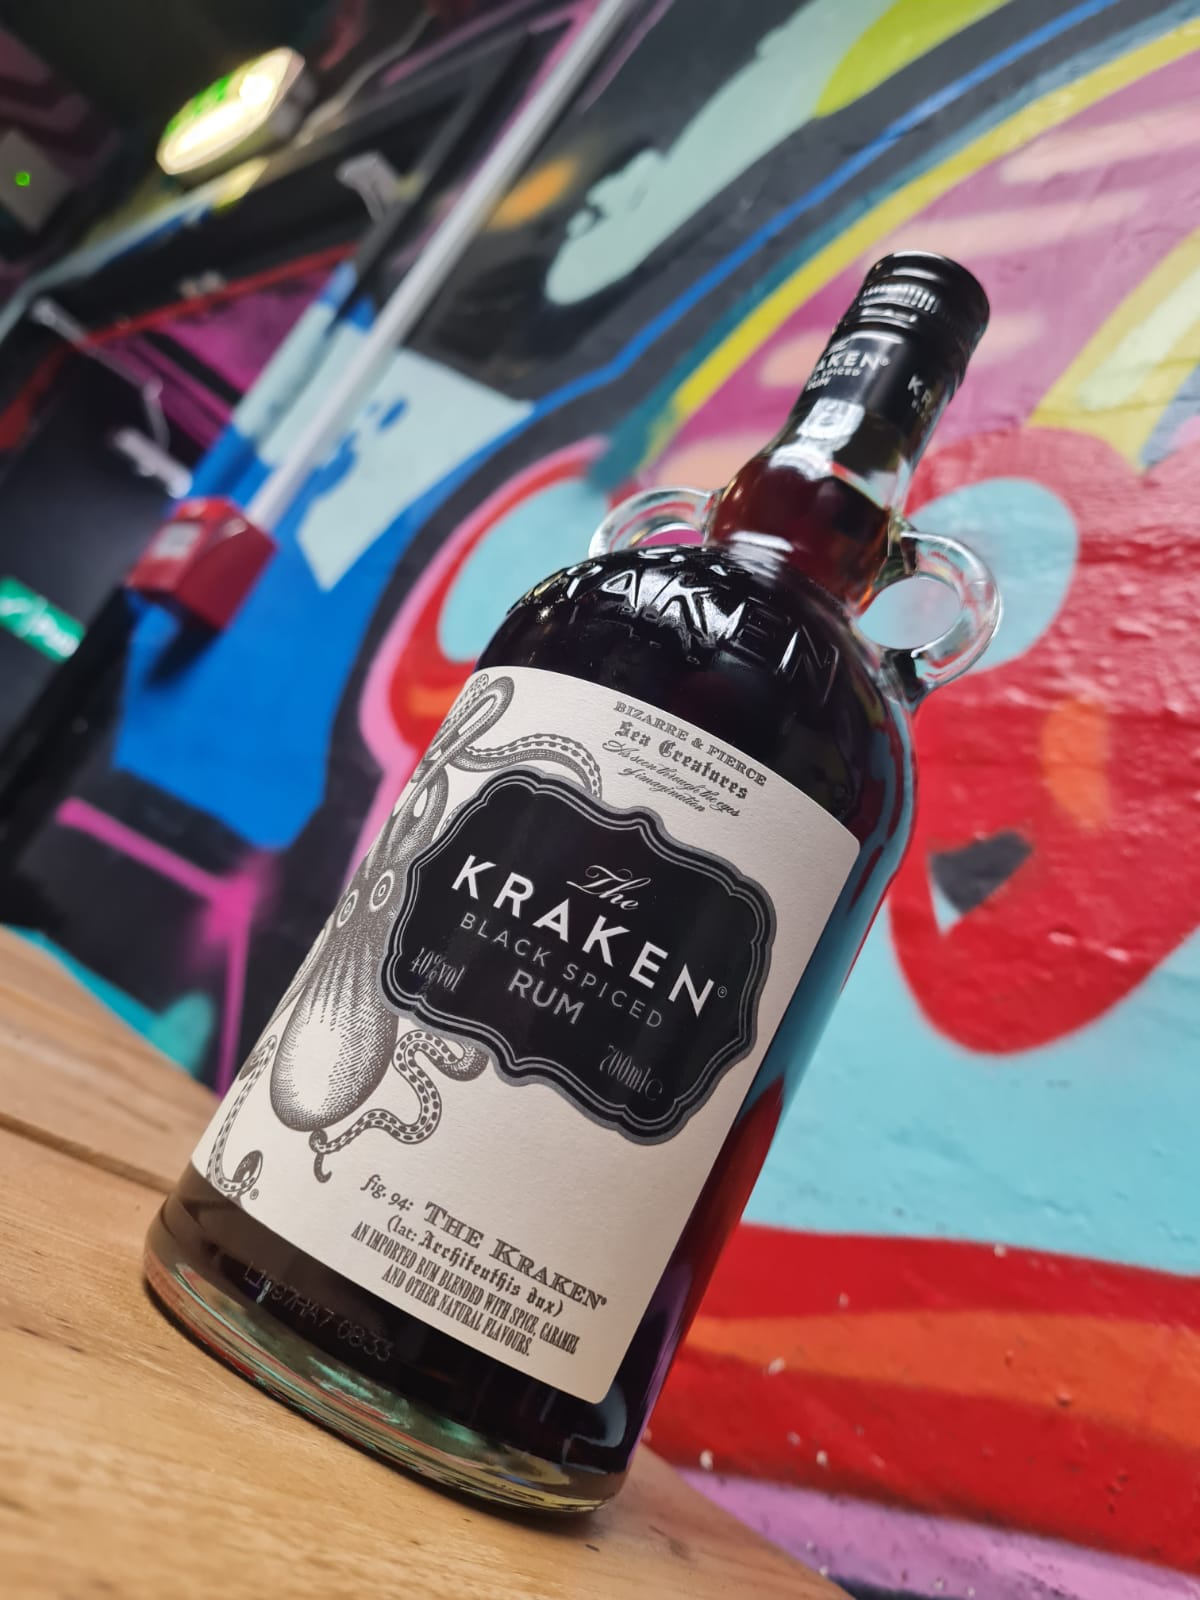 Have A Cracking Time With Kraken Rum